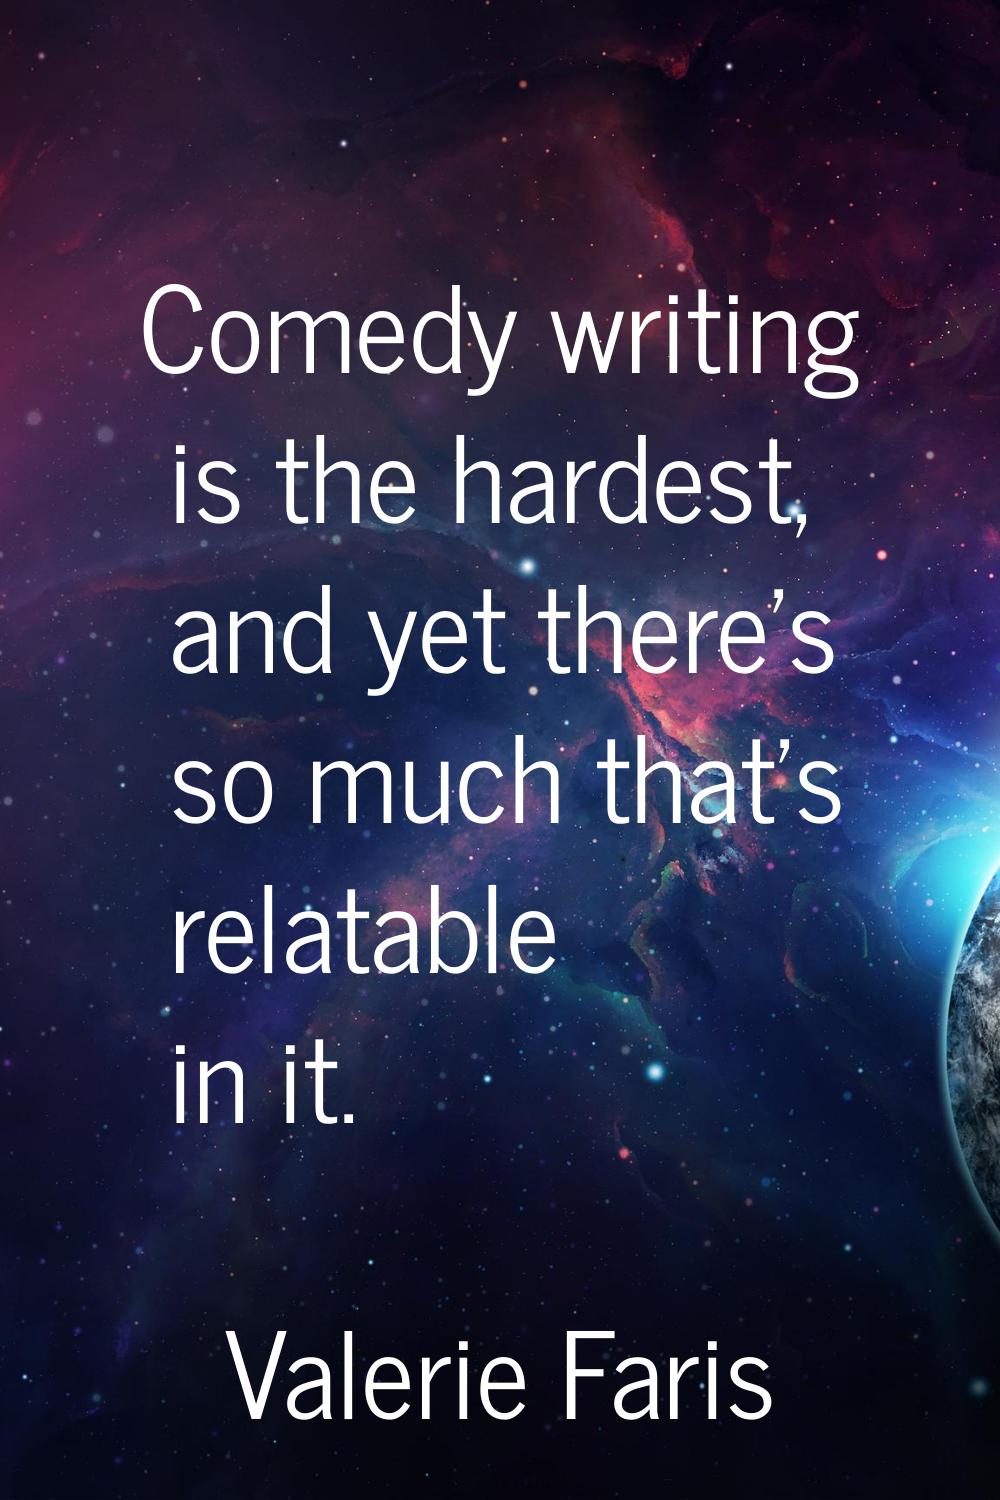 Comedy writing is the hardest, and yet there's so much that's relatable in it.